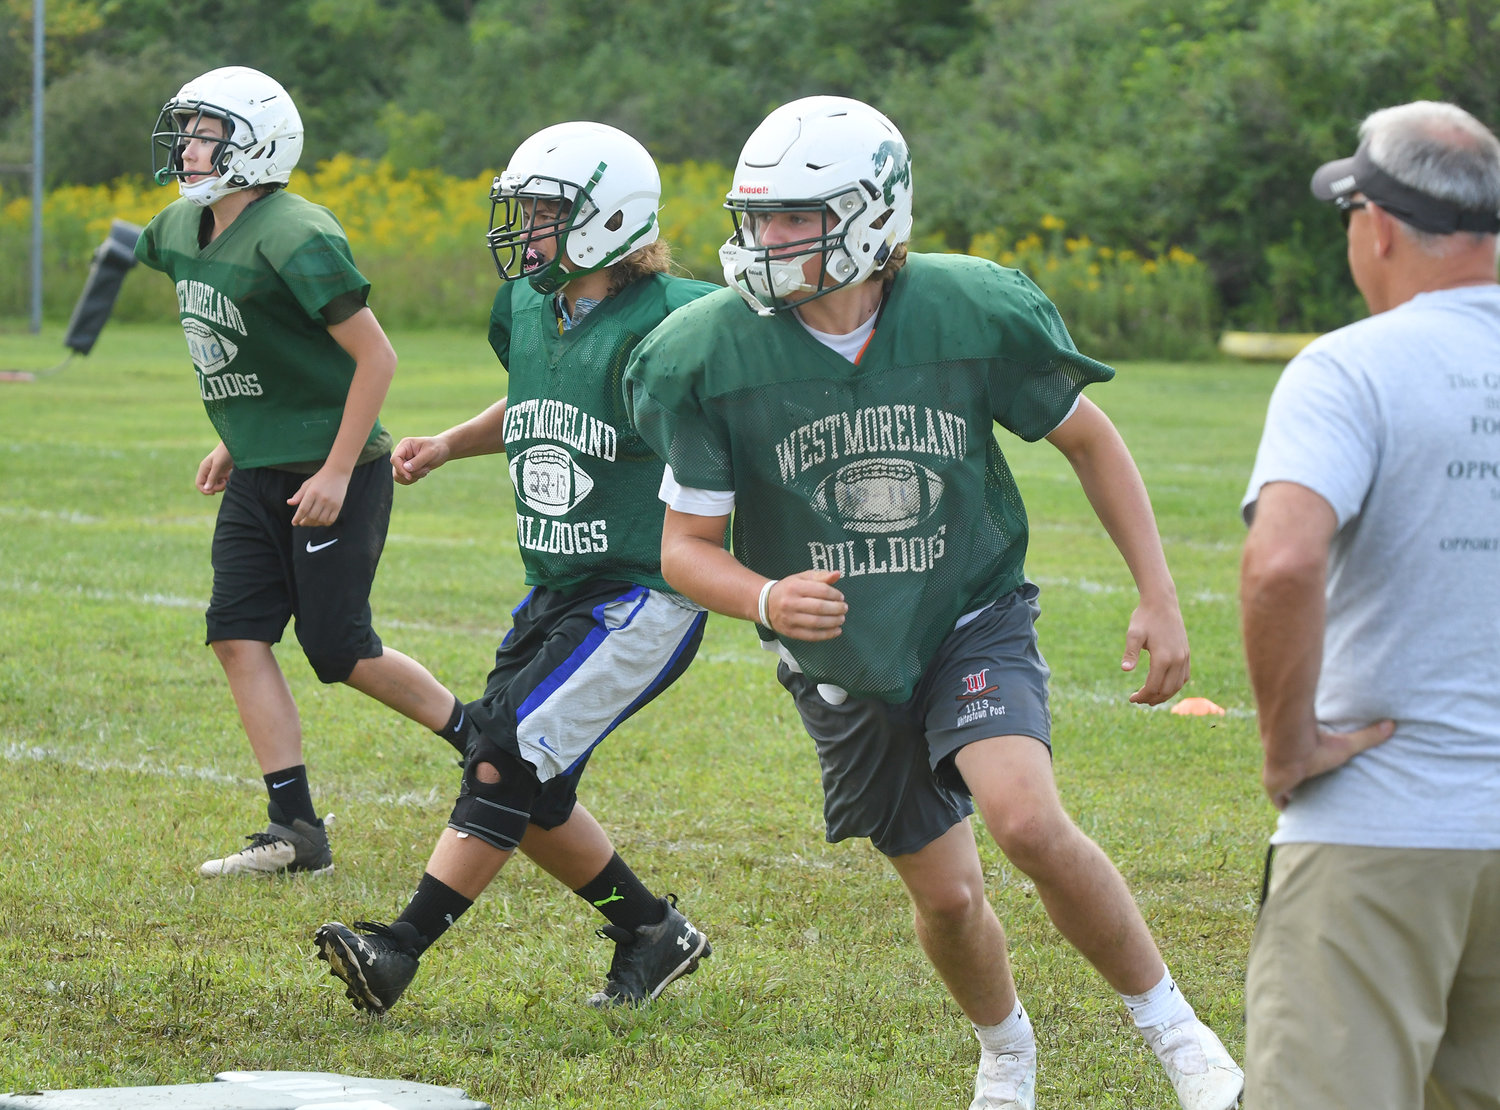 Westmoreland/Oriskany senior defensive end Mitchell Holmes make an around end move in front of assistant coach Jerry Fiorini during morning drills on Aug. 25.